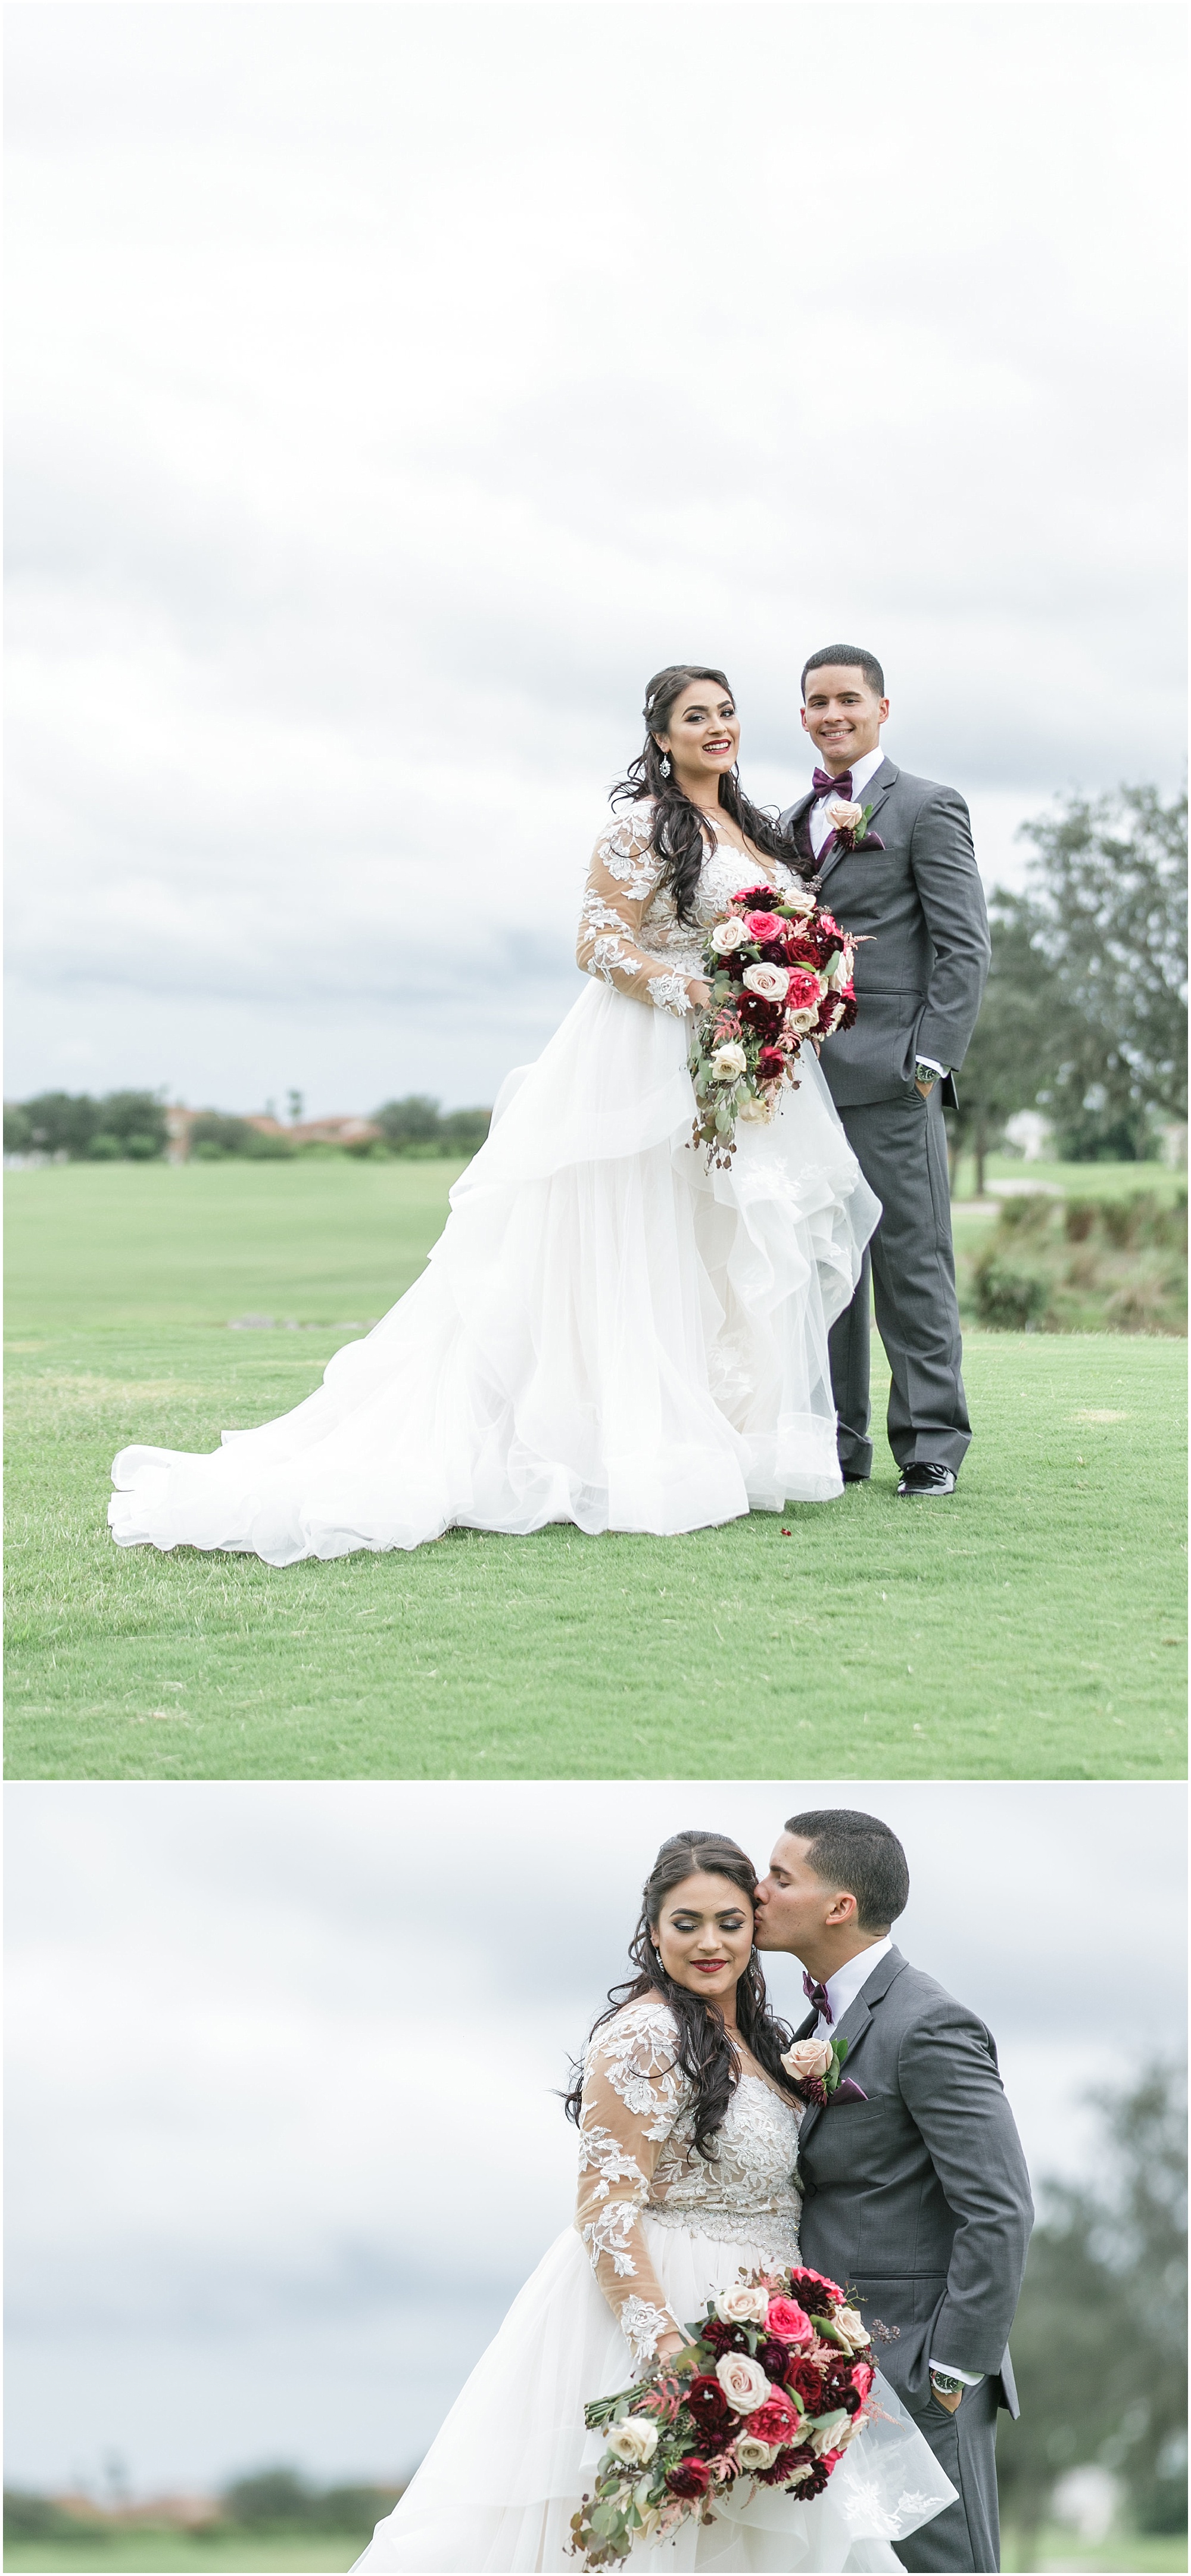 Bride and groom taking photos together while standing on a golf course. 